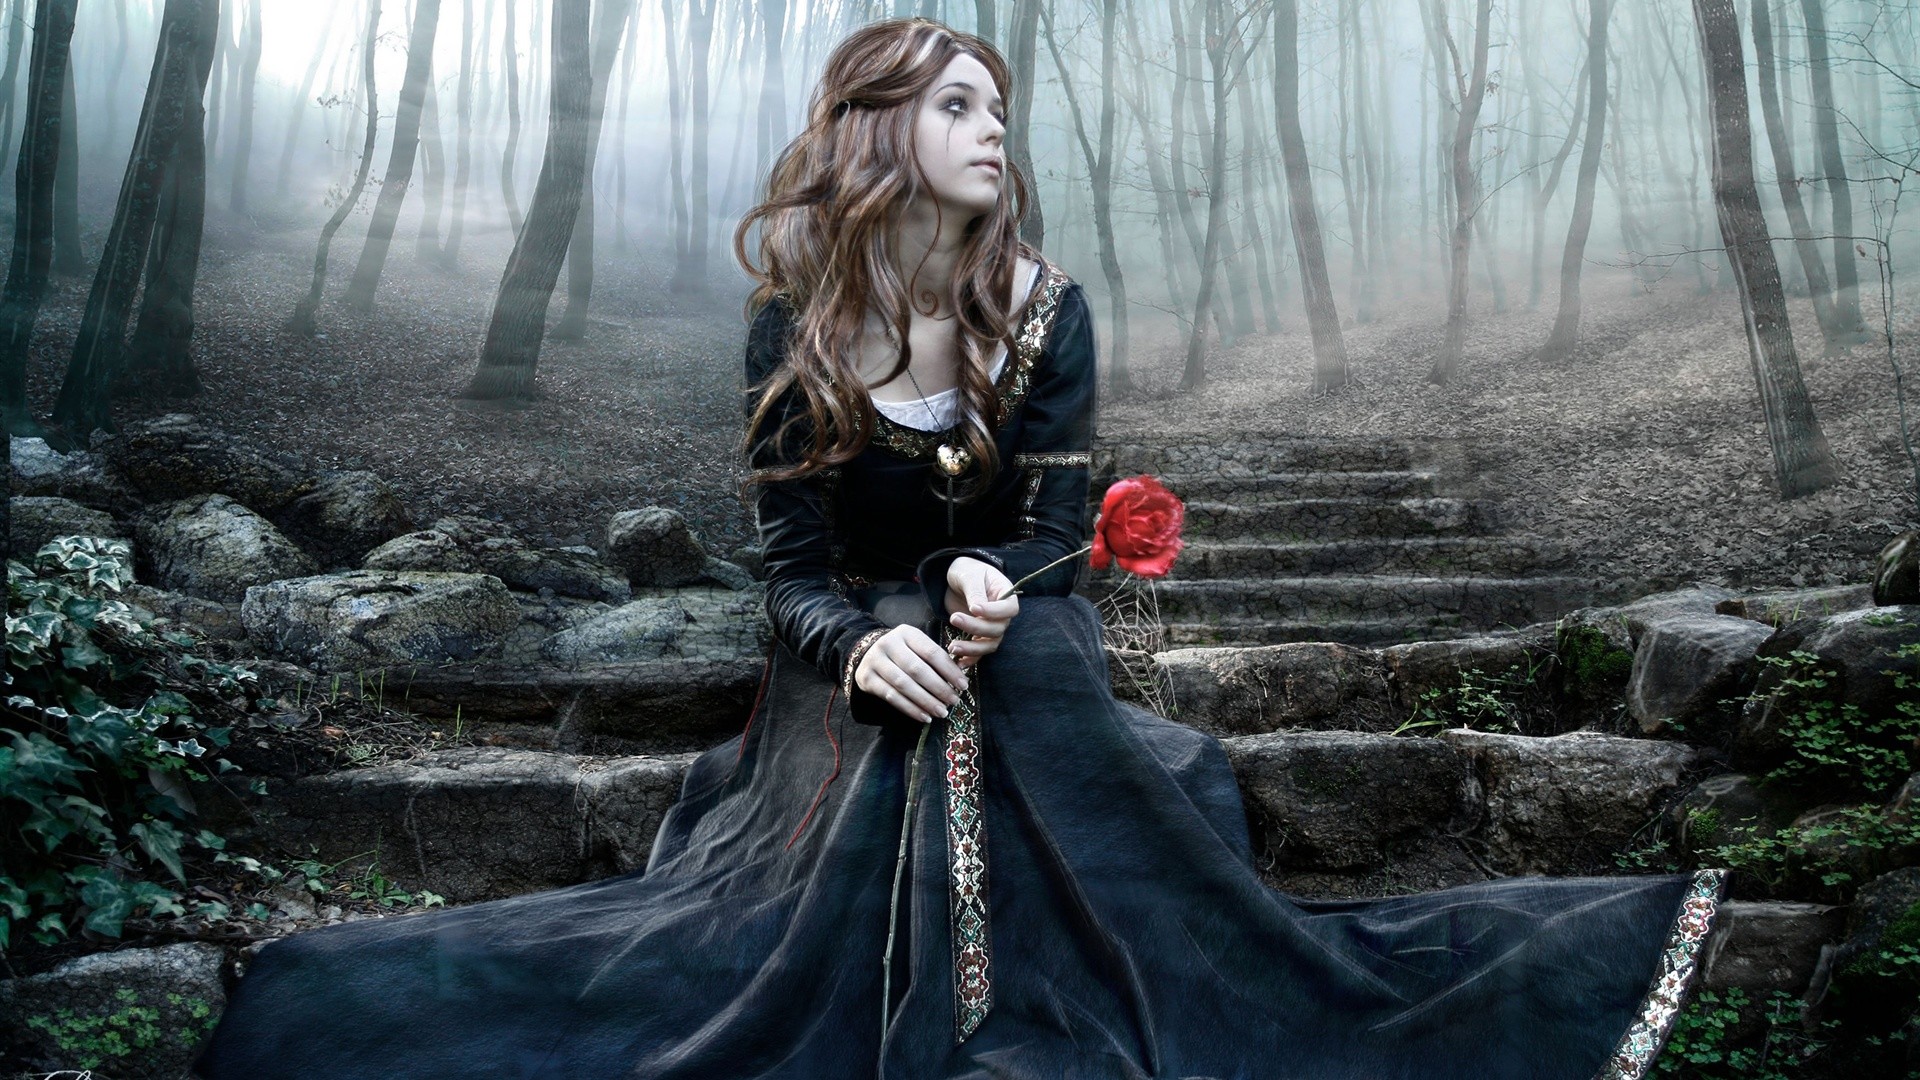 1920x1080 Background Gothic Girls | Gothic girl in the forest Wallpapers, Artistic |  HD Desktop Wallpapers